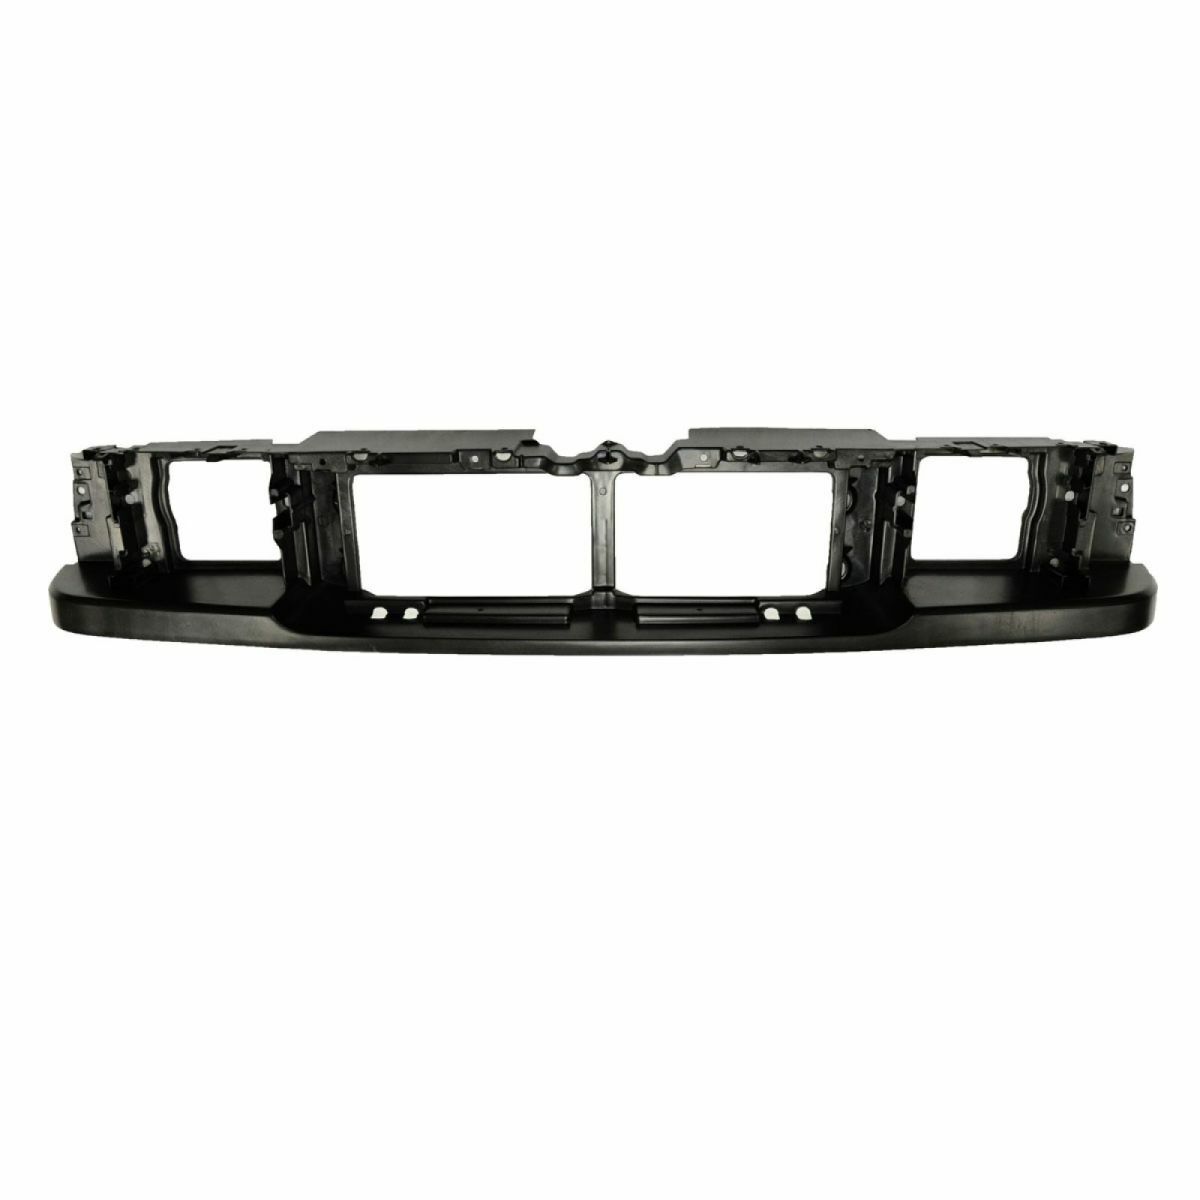 Header Grille Headlight Mounting Opening Nose Panel for 93-97 Ford Ranger